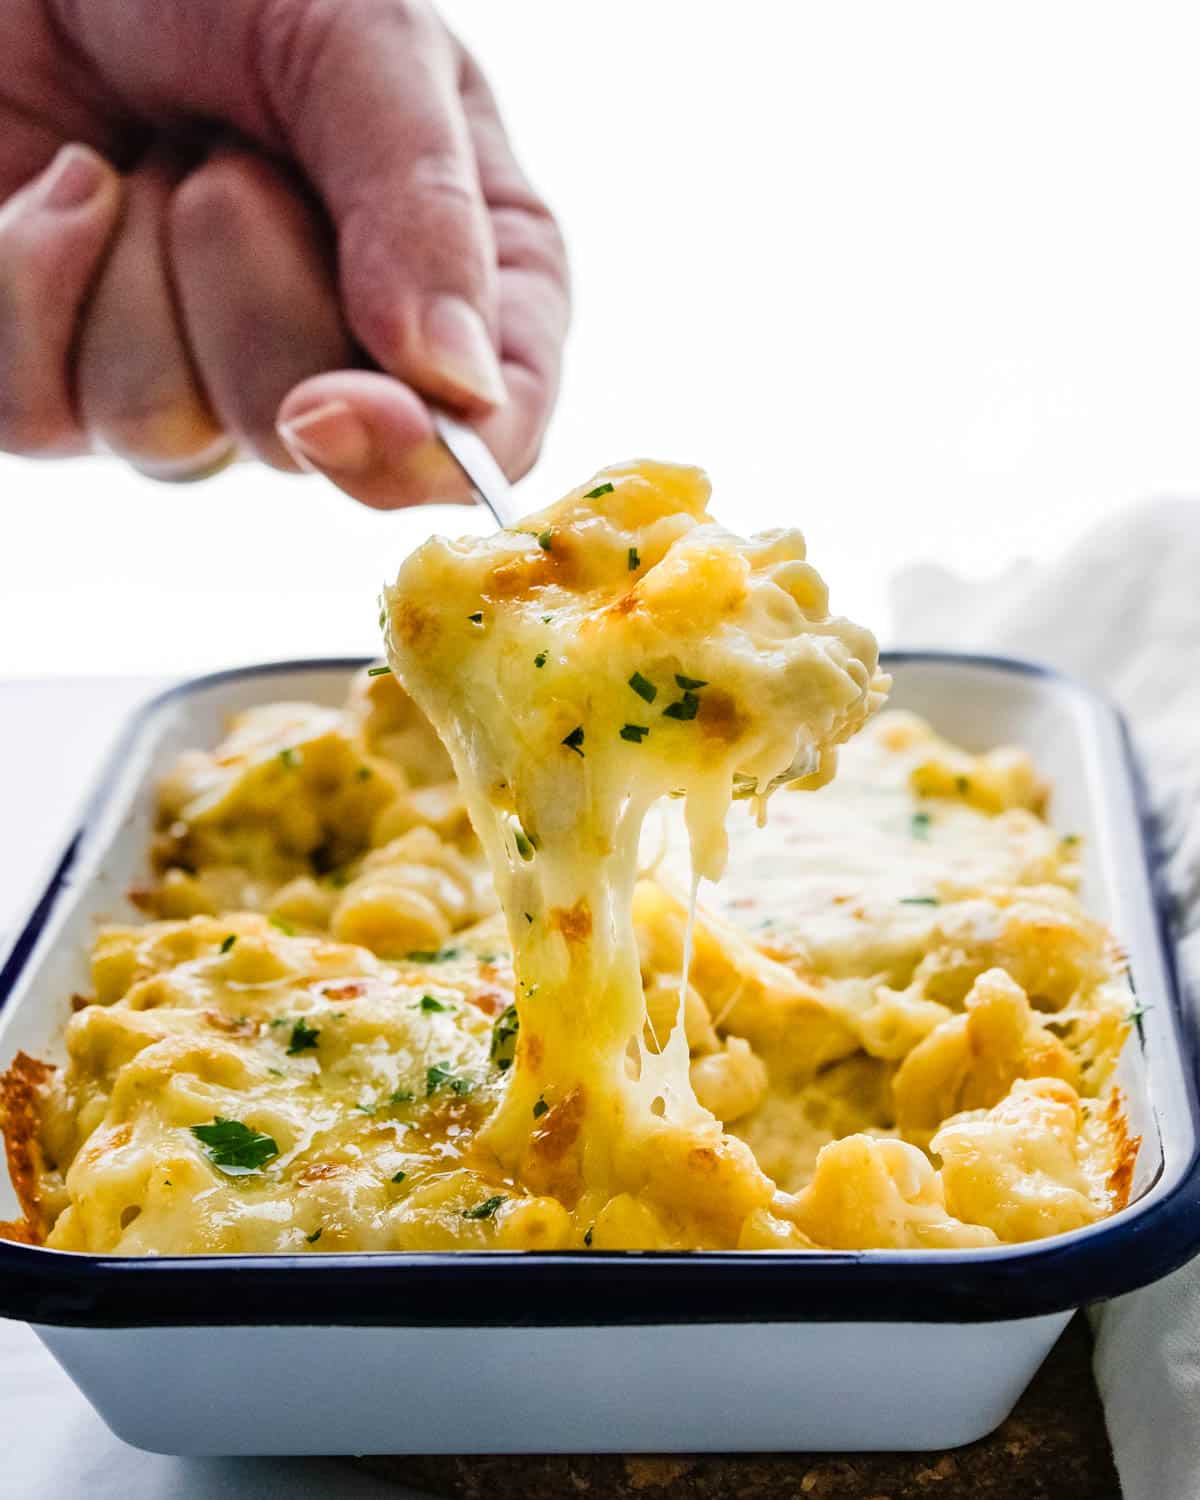 Scooping the ultimate mac and cheese from the casserole dish.